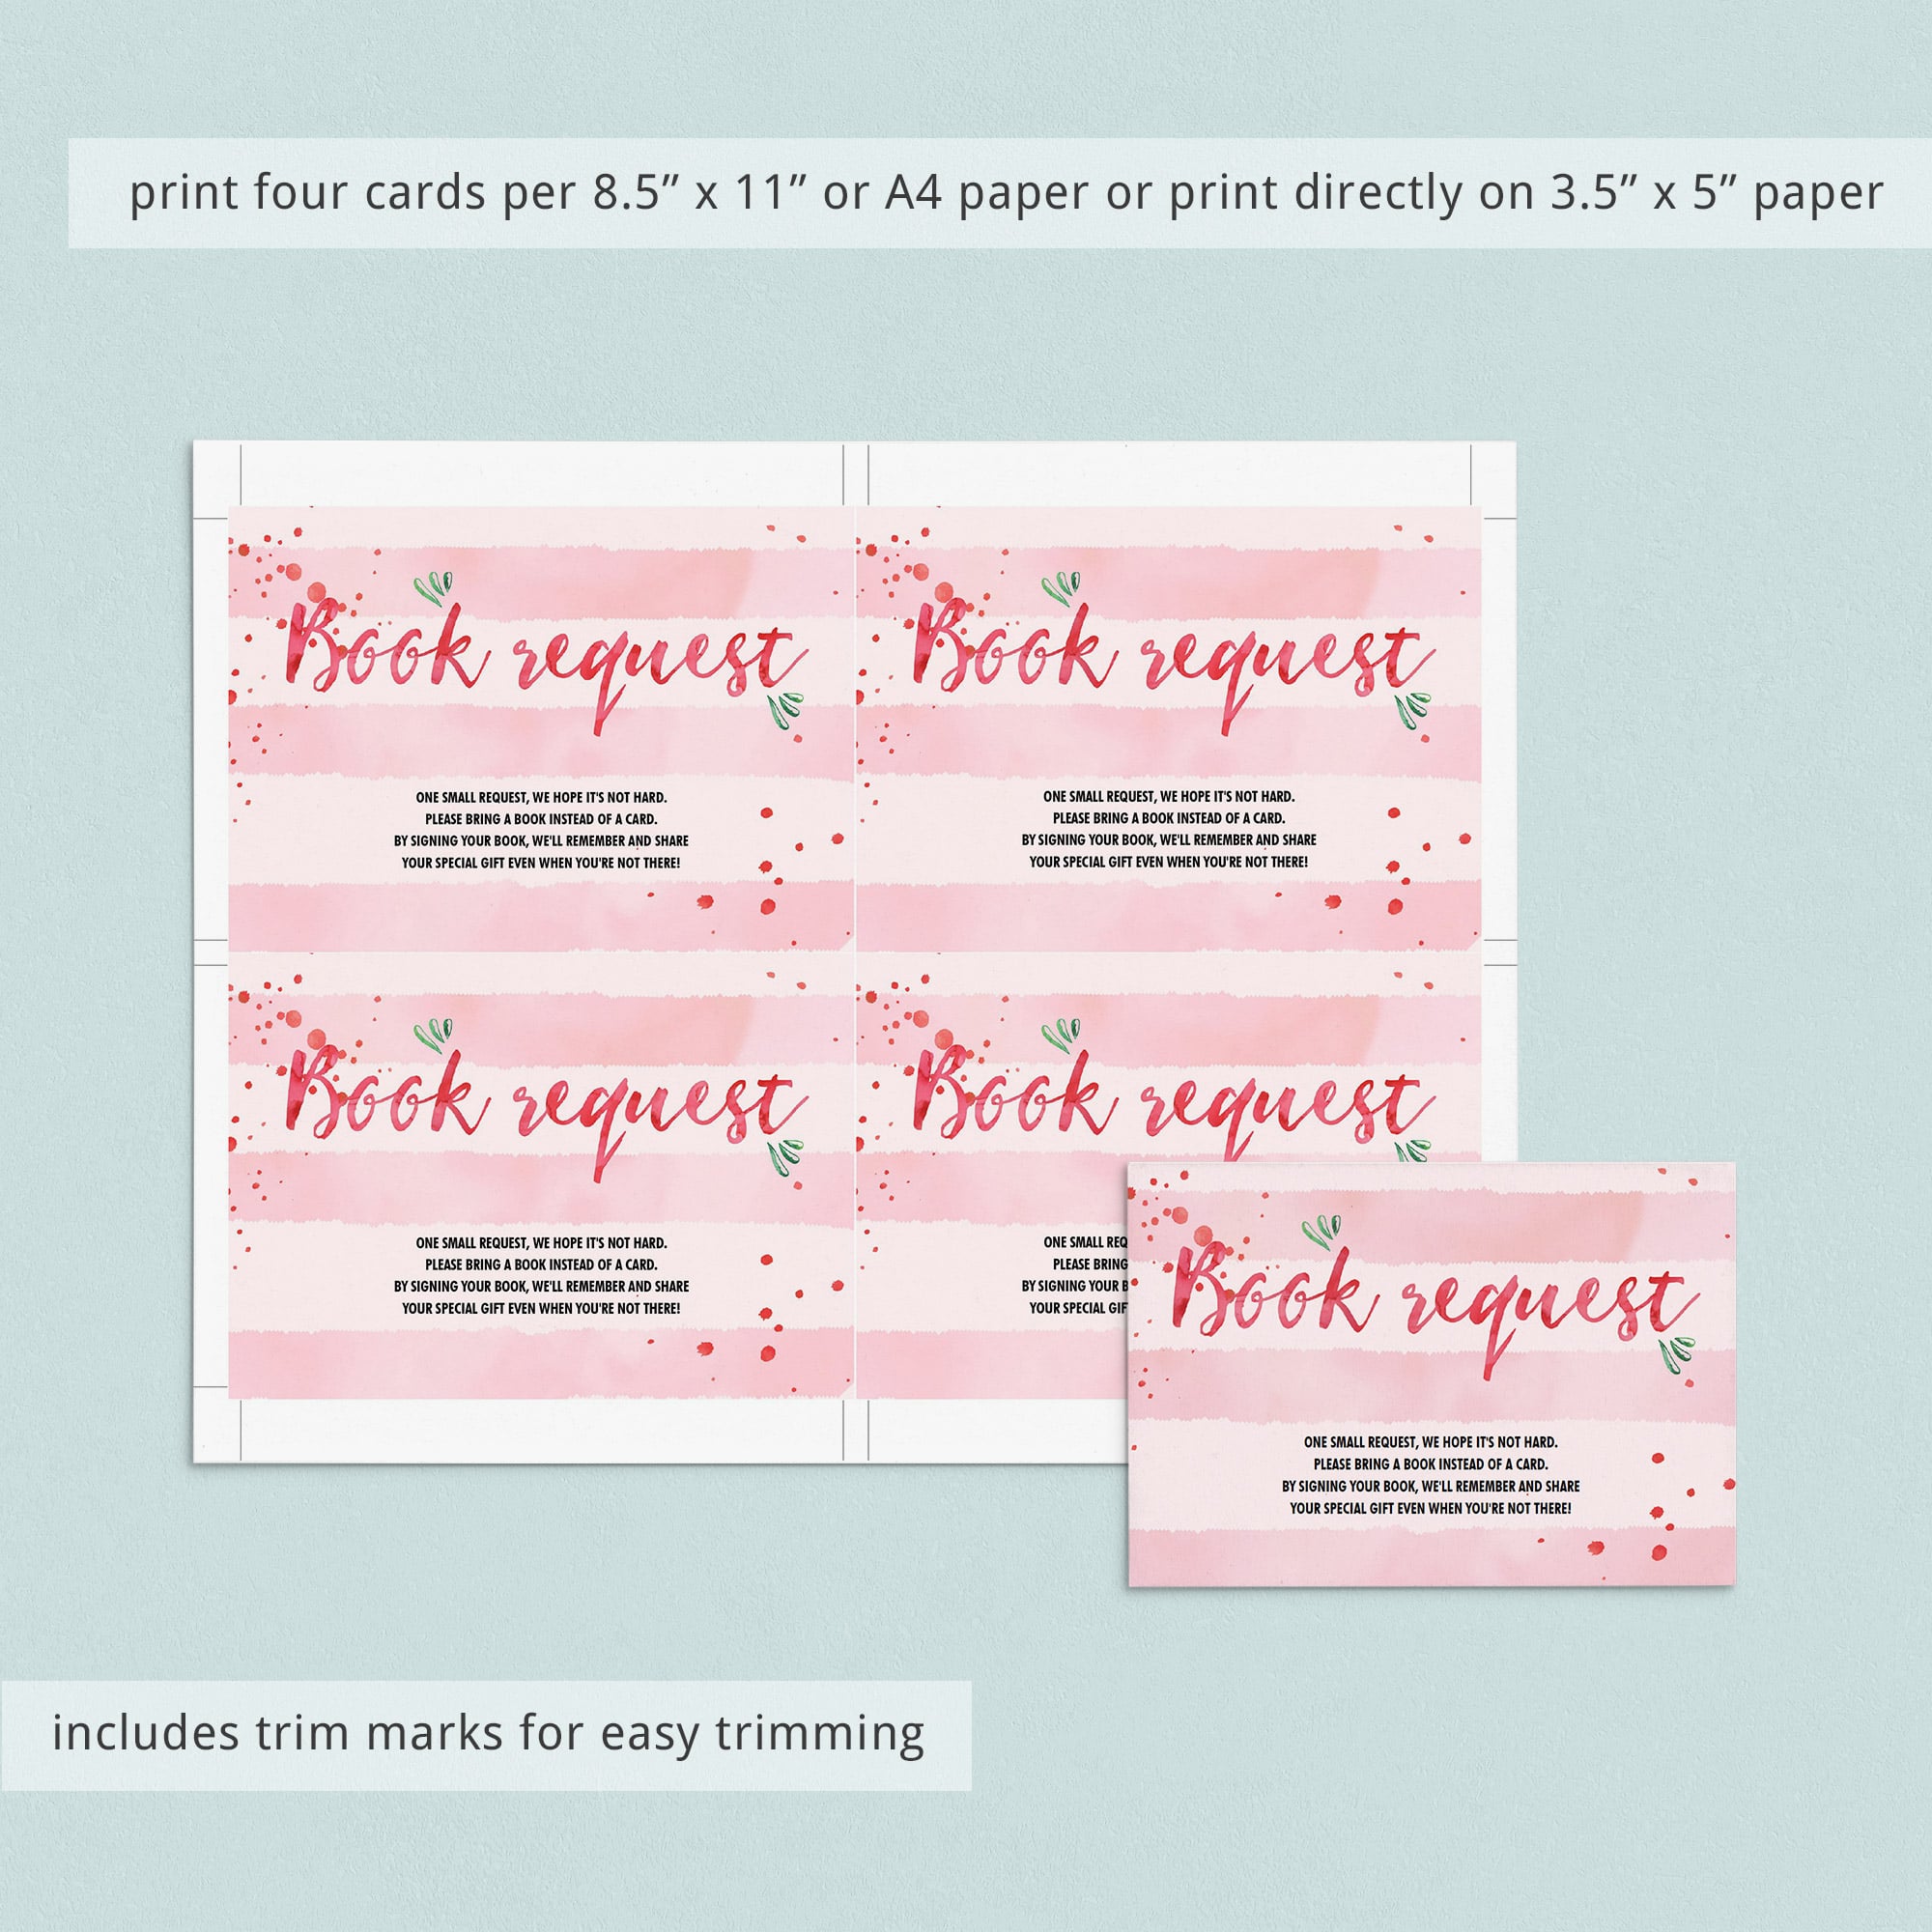 Bring a book for baby shower cards printable girl theme by LittleSizzle